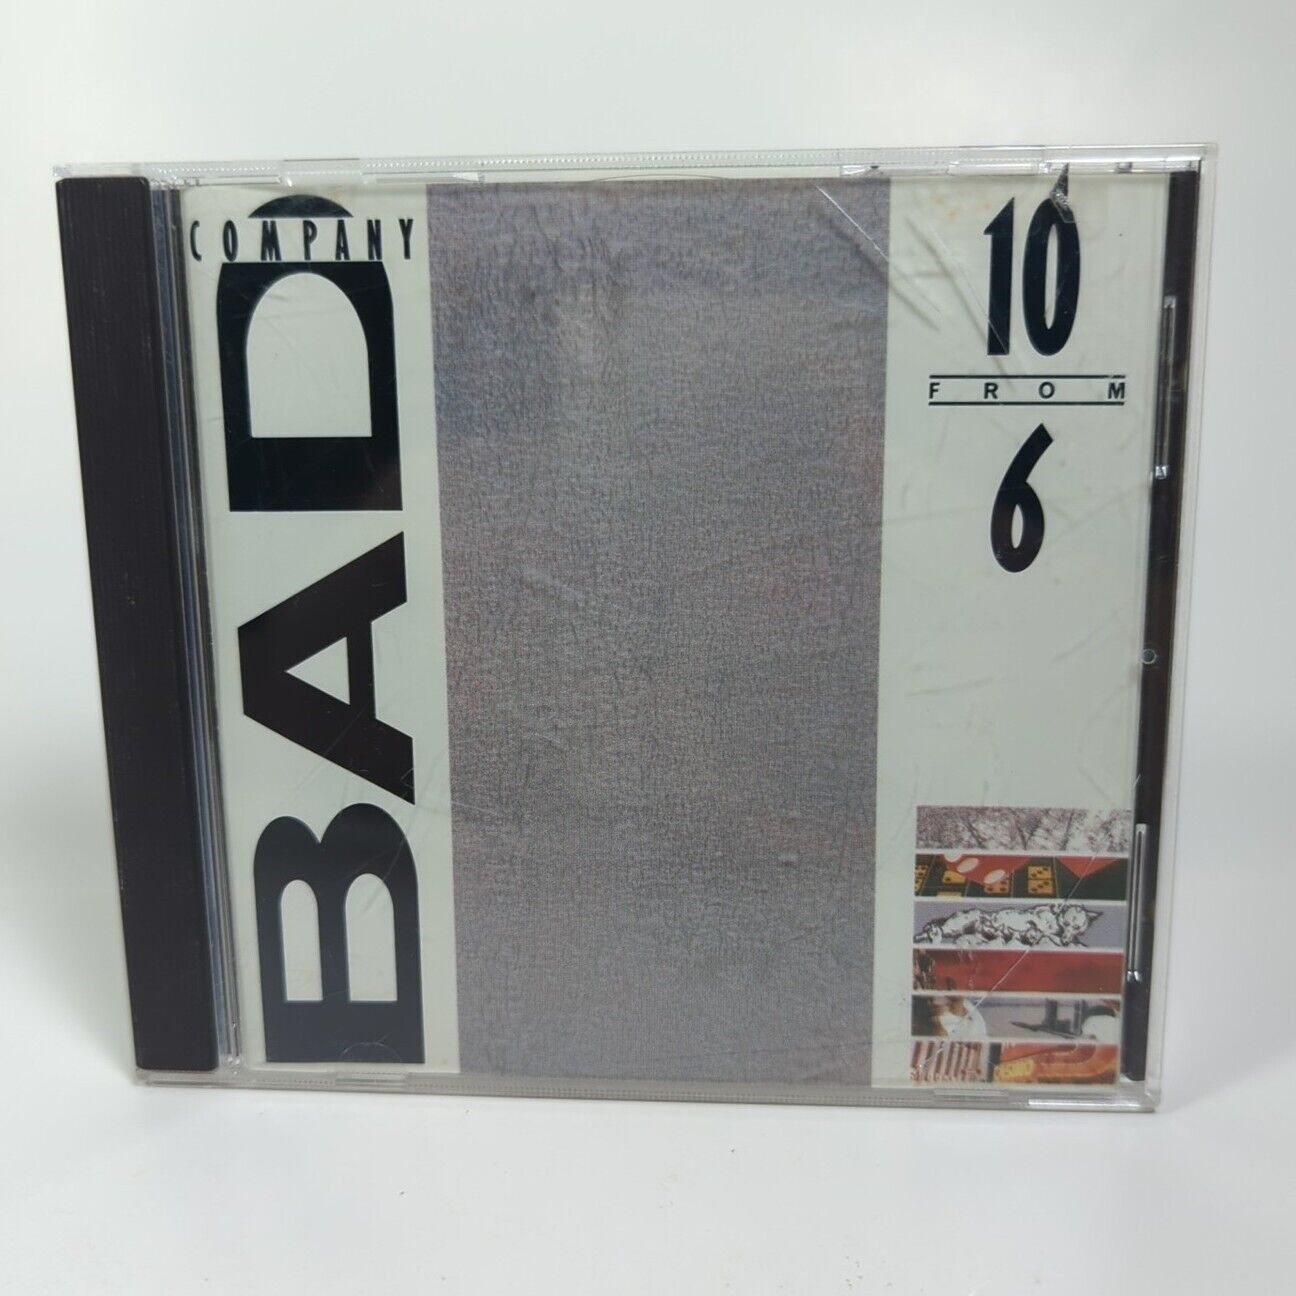 10 from 6 by Bad Company (CD, Jan-1986, Atlantic (Label))